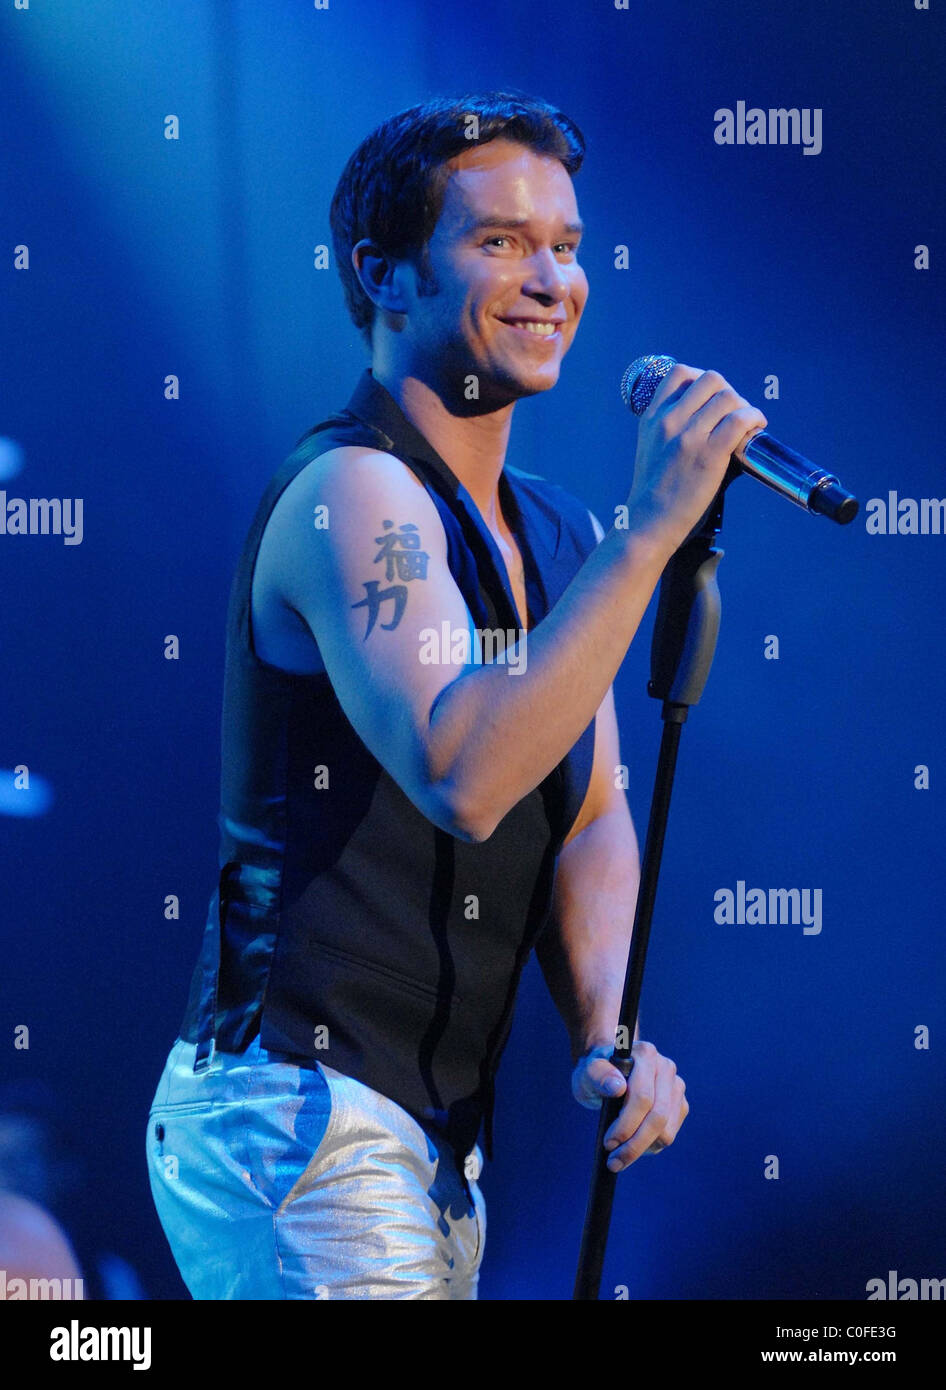 Stephen Gately Boyzone perform during the opening night of their comeback tour at the Odyssey arena Belfast, Ireland - 25.05.08 Stock Photo